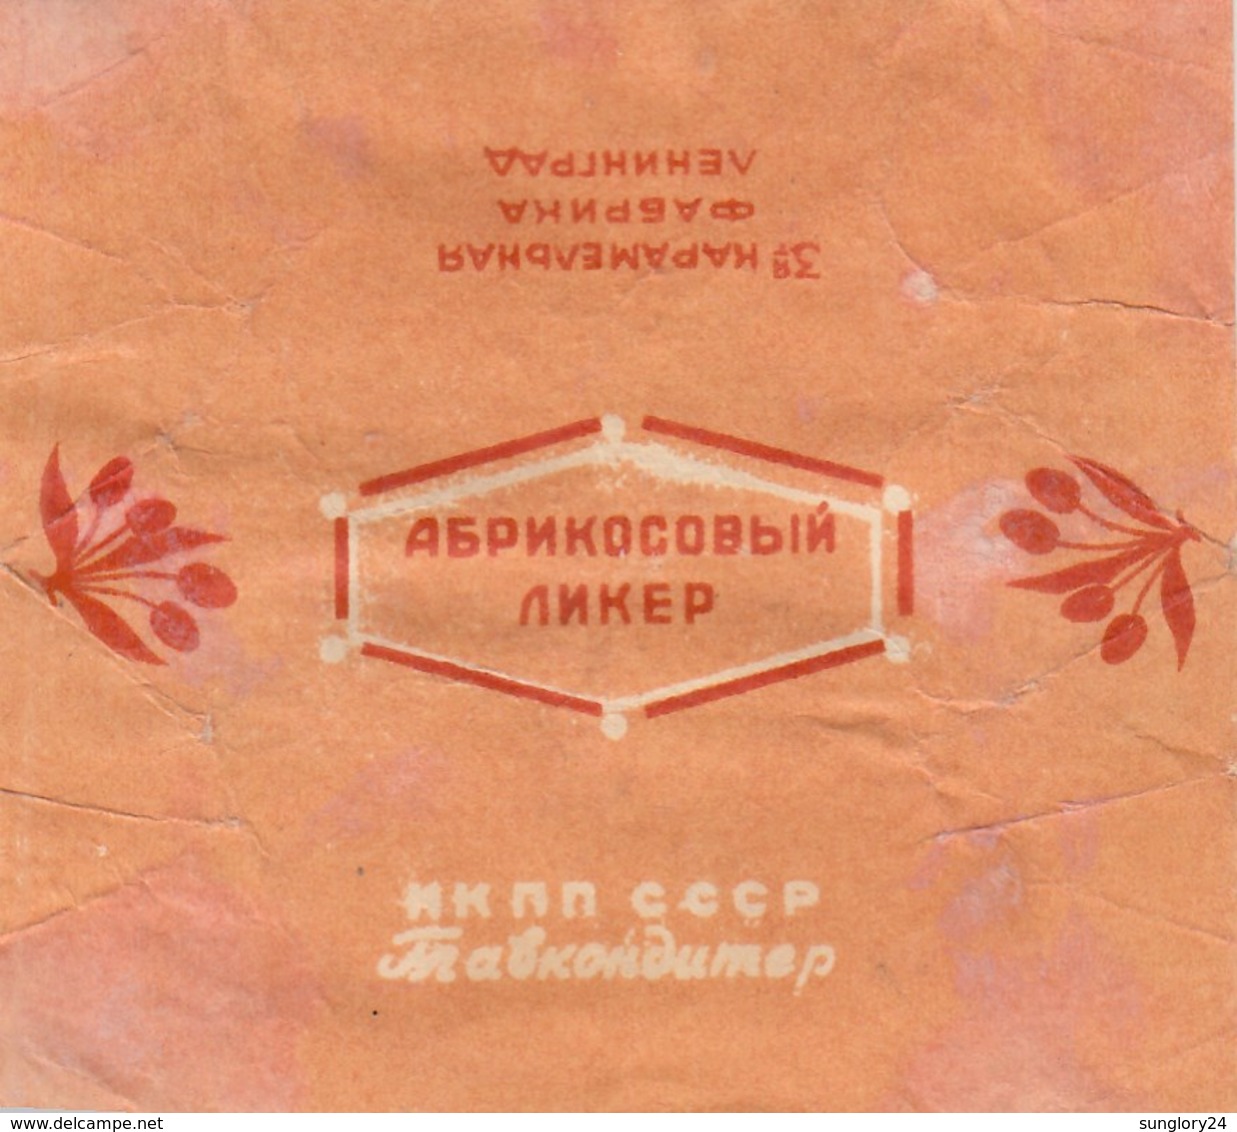 RUSSIA. THE LABEL FROM THE CANDY. APRICOTE LIKER. LENINGRAD. - Chocolate